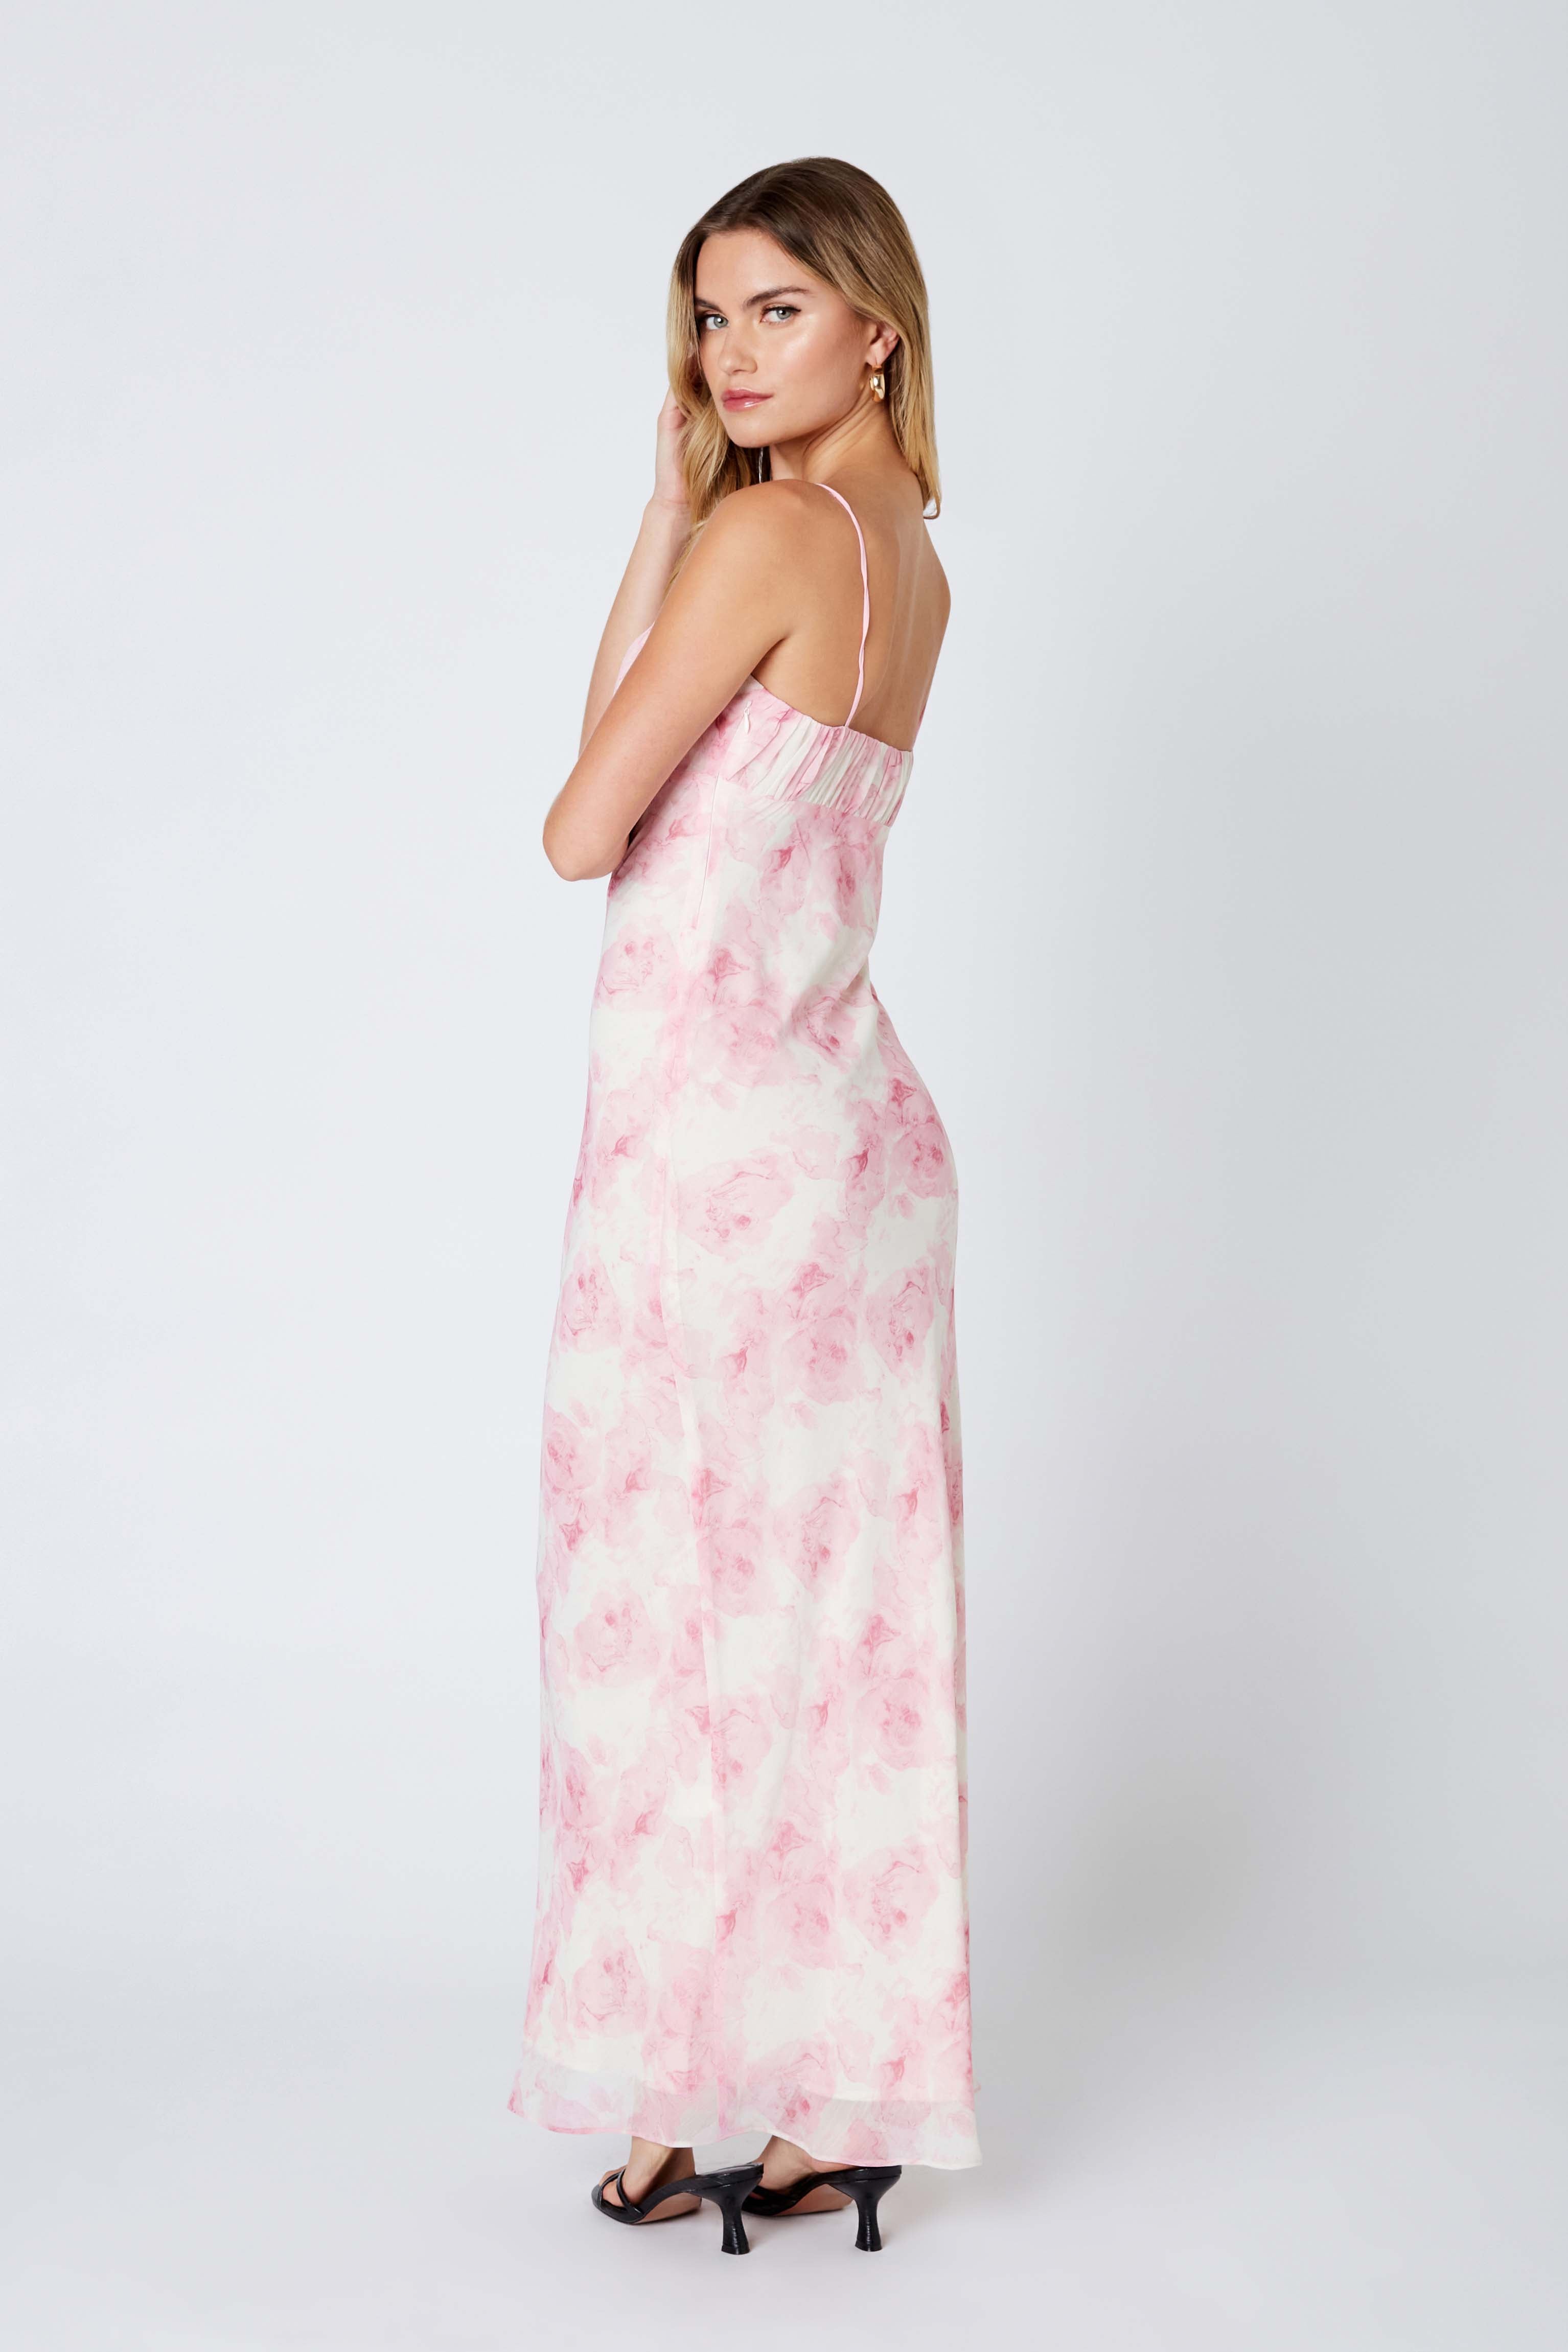 Floral Maxi Dress in Cameo Pink Back View